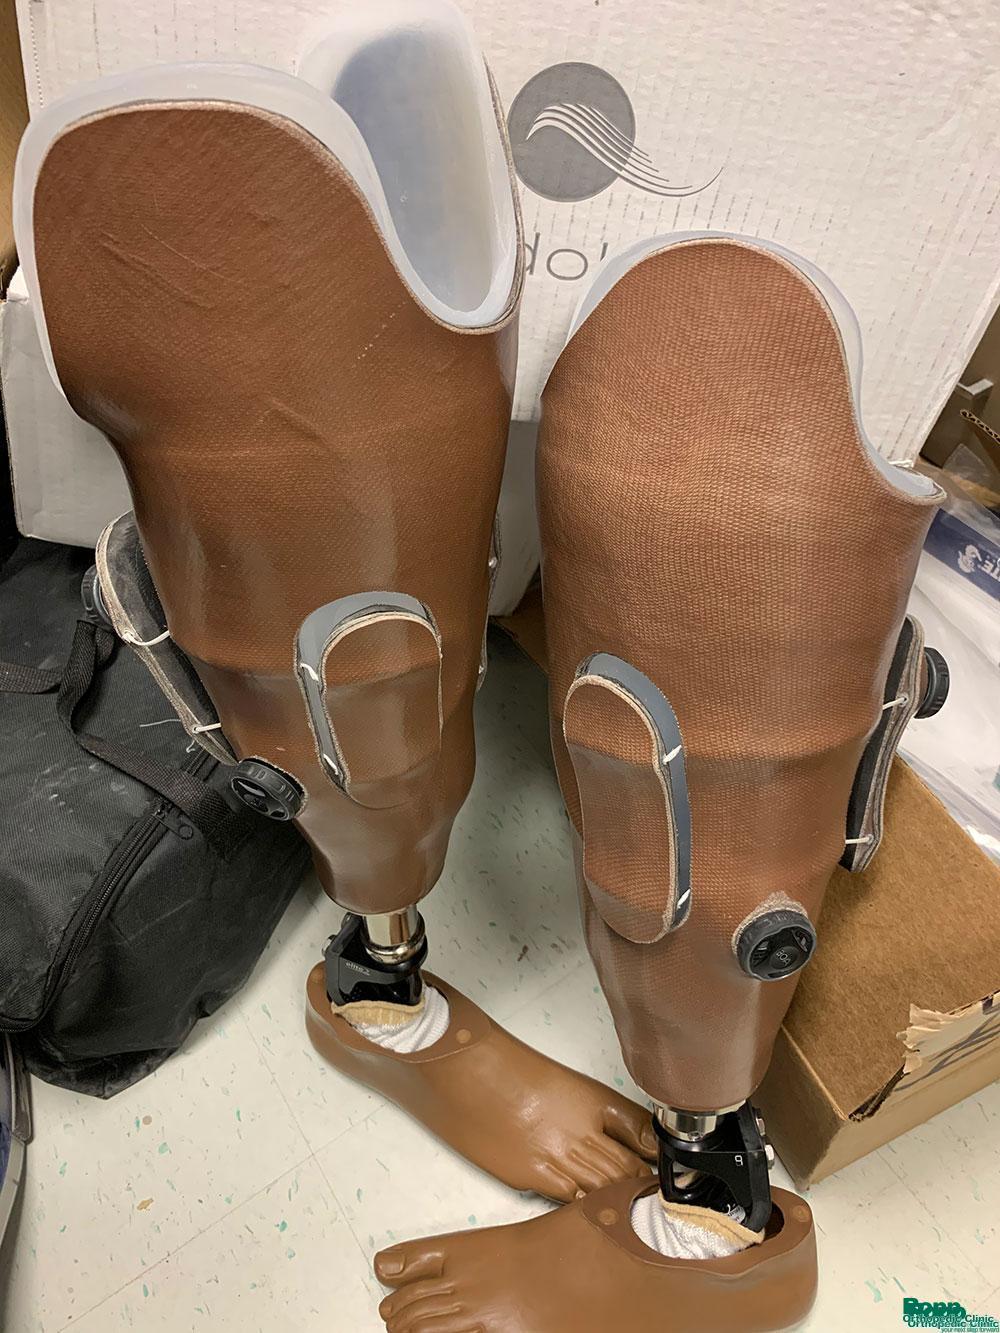 Double amputee prostheses ready for the next fitting.